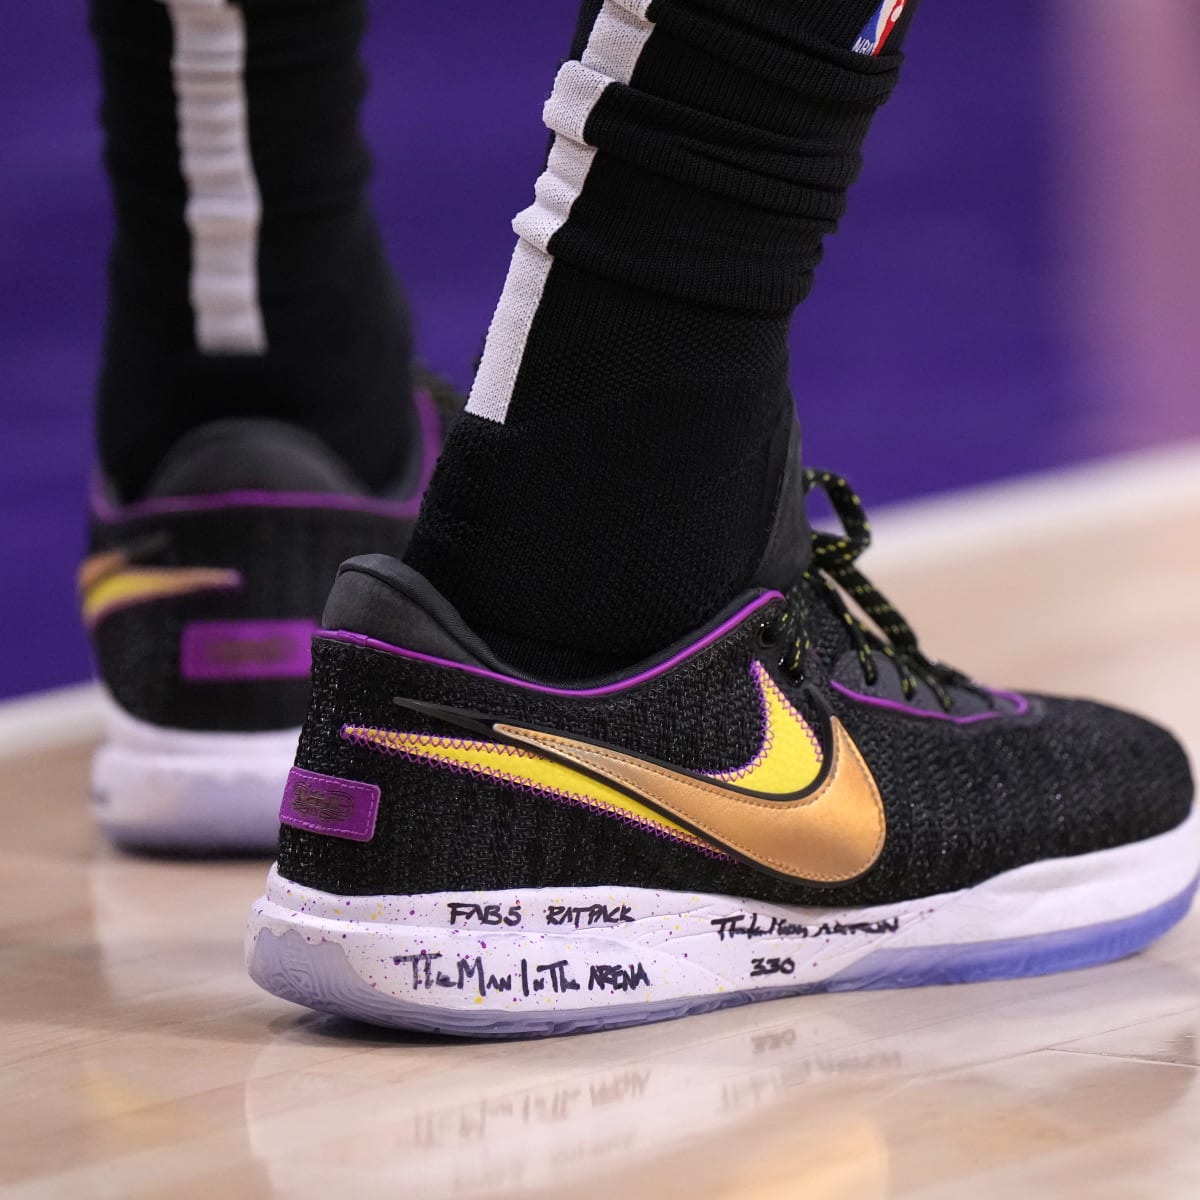 Every Sneaker LeBron James Has Worn as a Laker